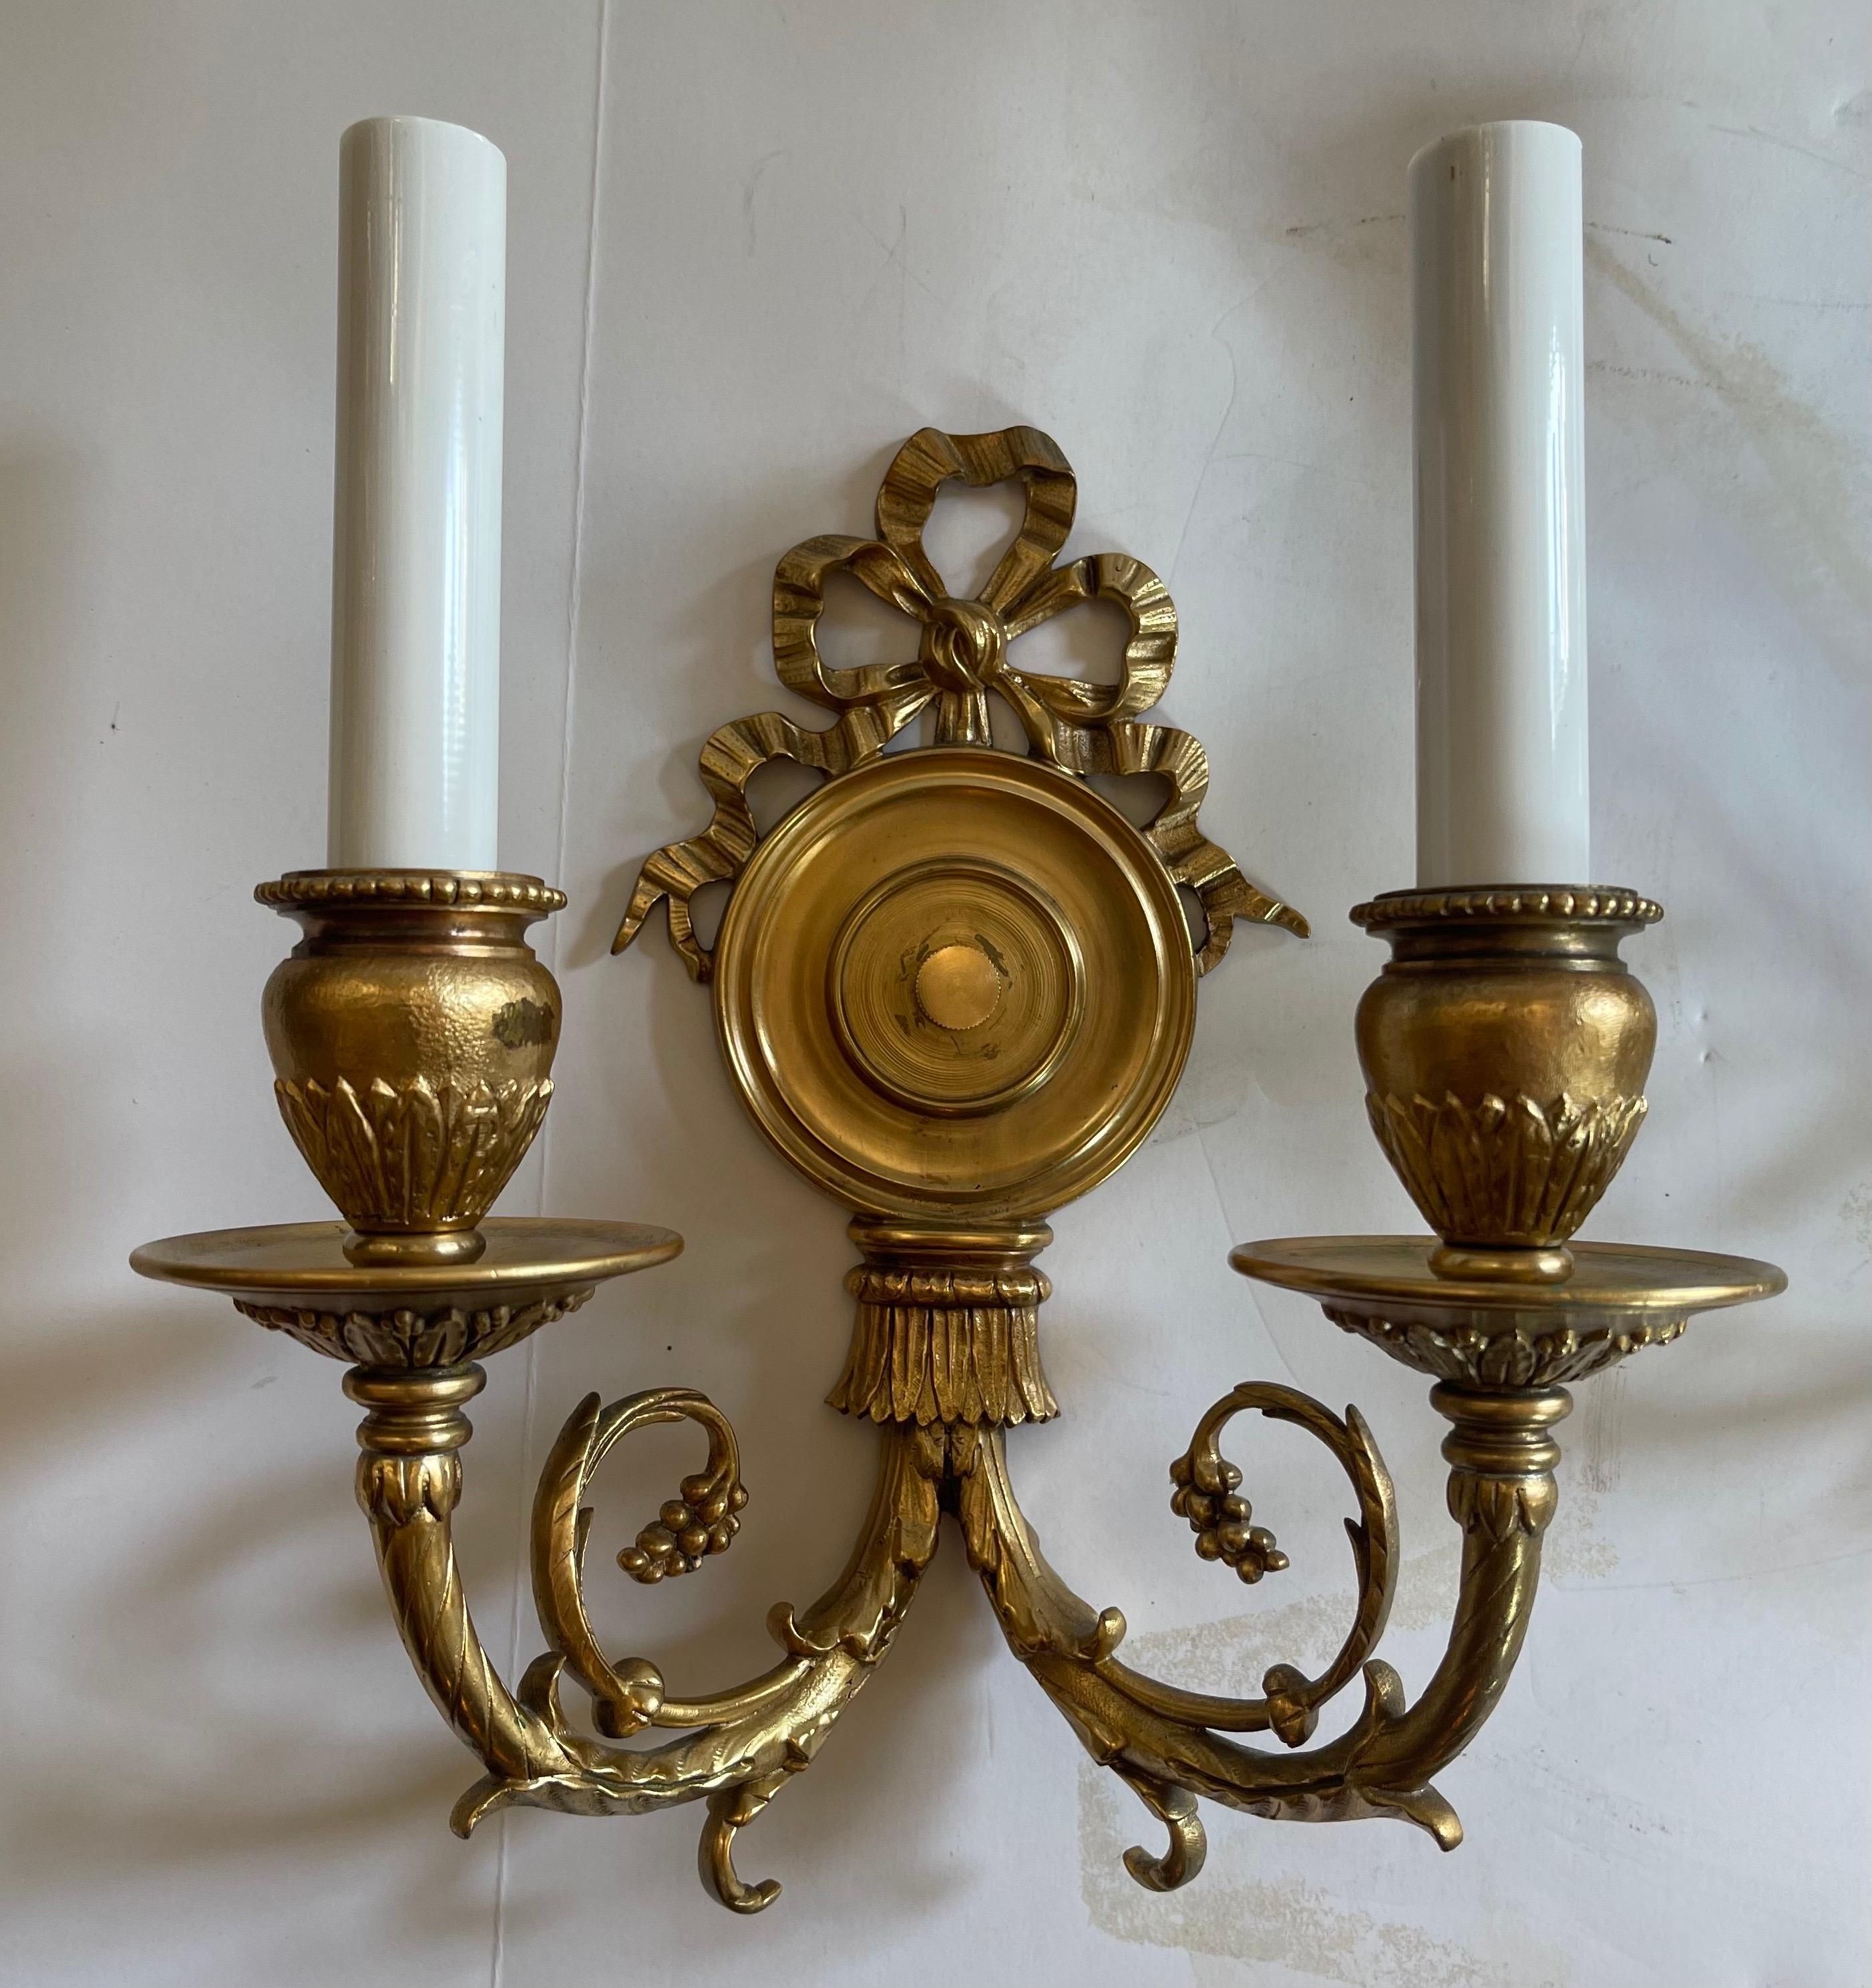 A wonderful pair of French dore bronze bow top wall sconces in the manner of E.F. Caldwell.